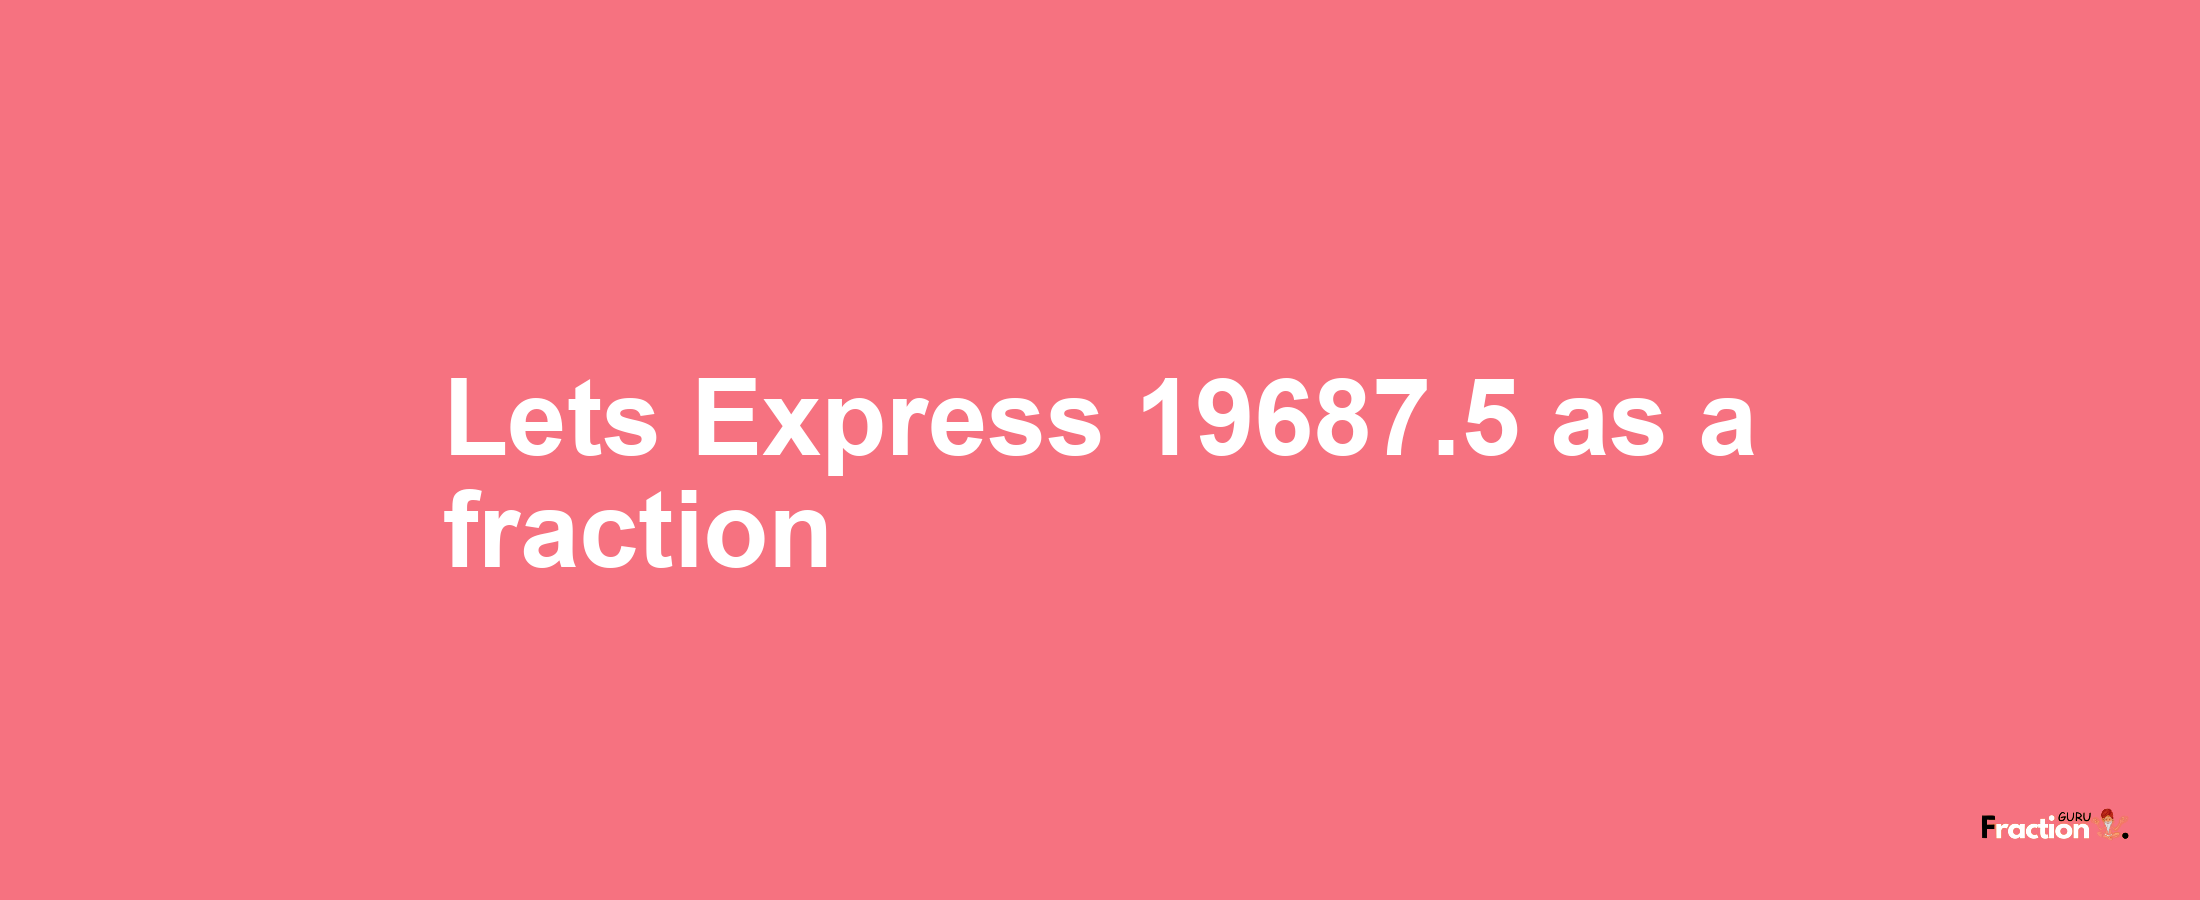 Lets Express 19687.5 as afraction